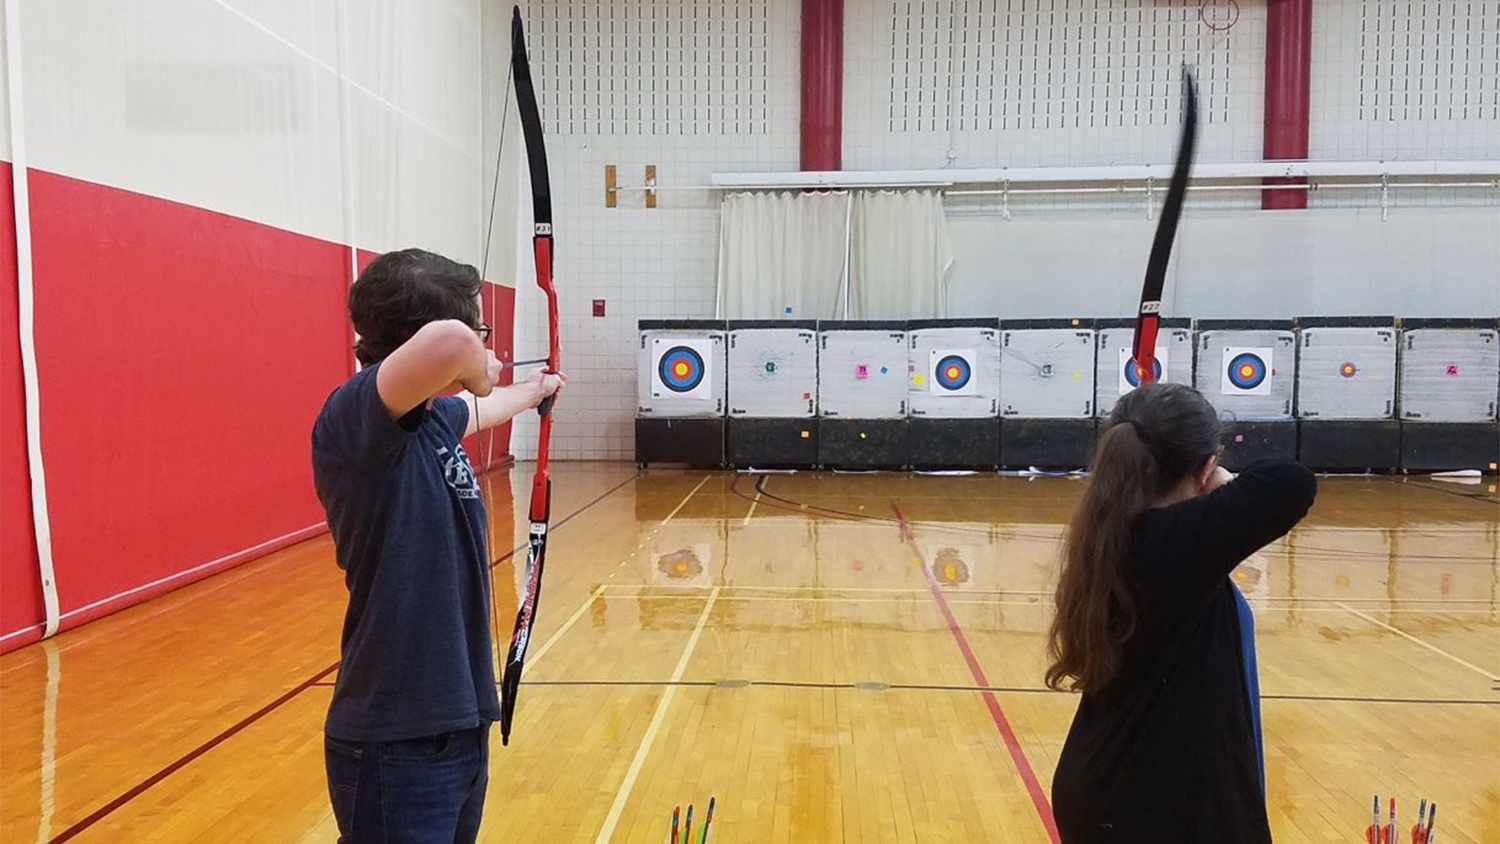 Students aim their bows at targets during an archery course